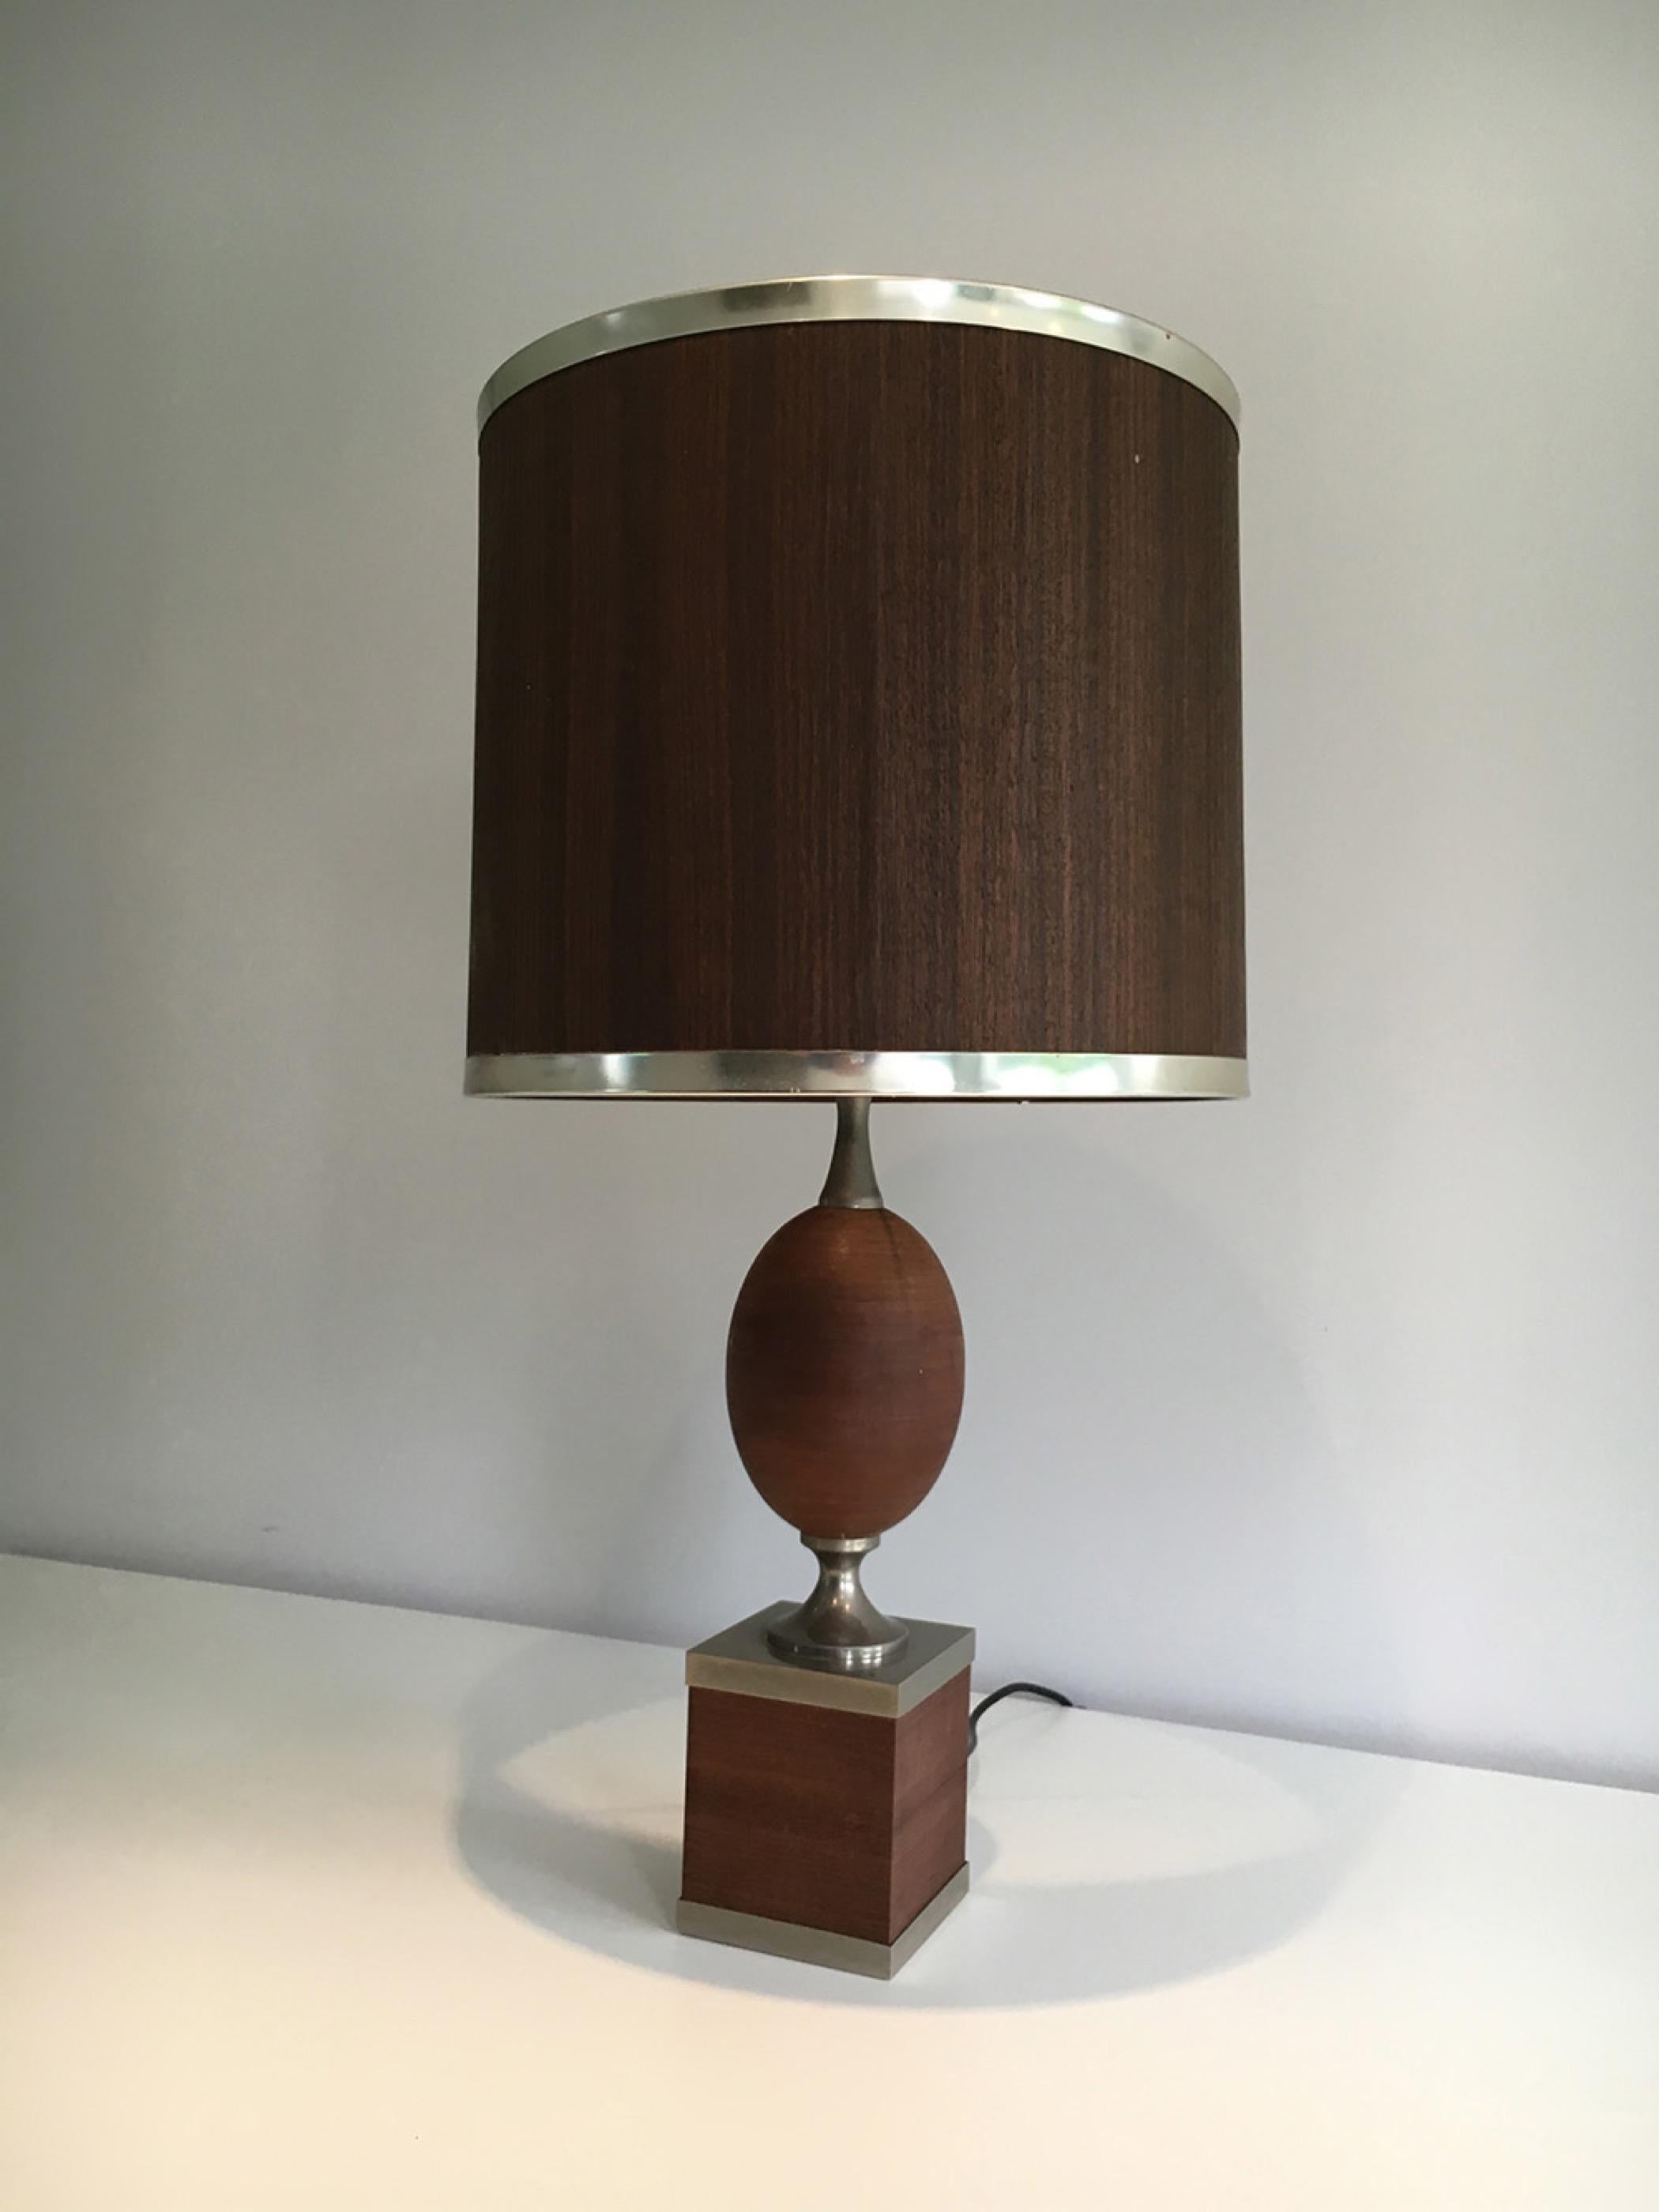 Wood and Brushed Steel Egg Lamp with Wooden Shade, circa 1970 For Sale 7